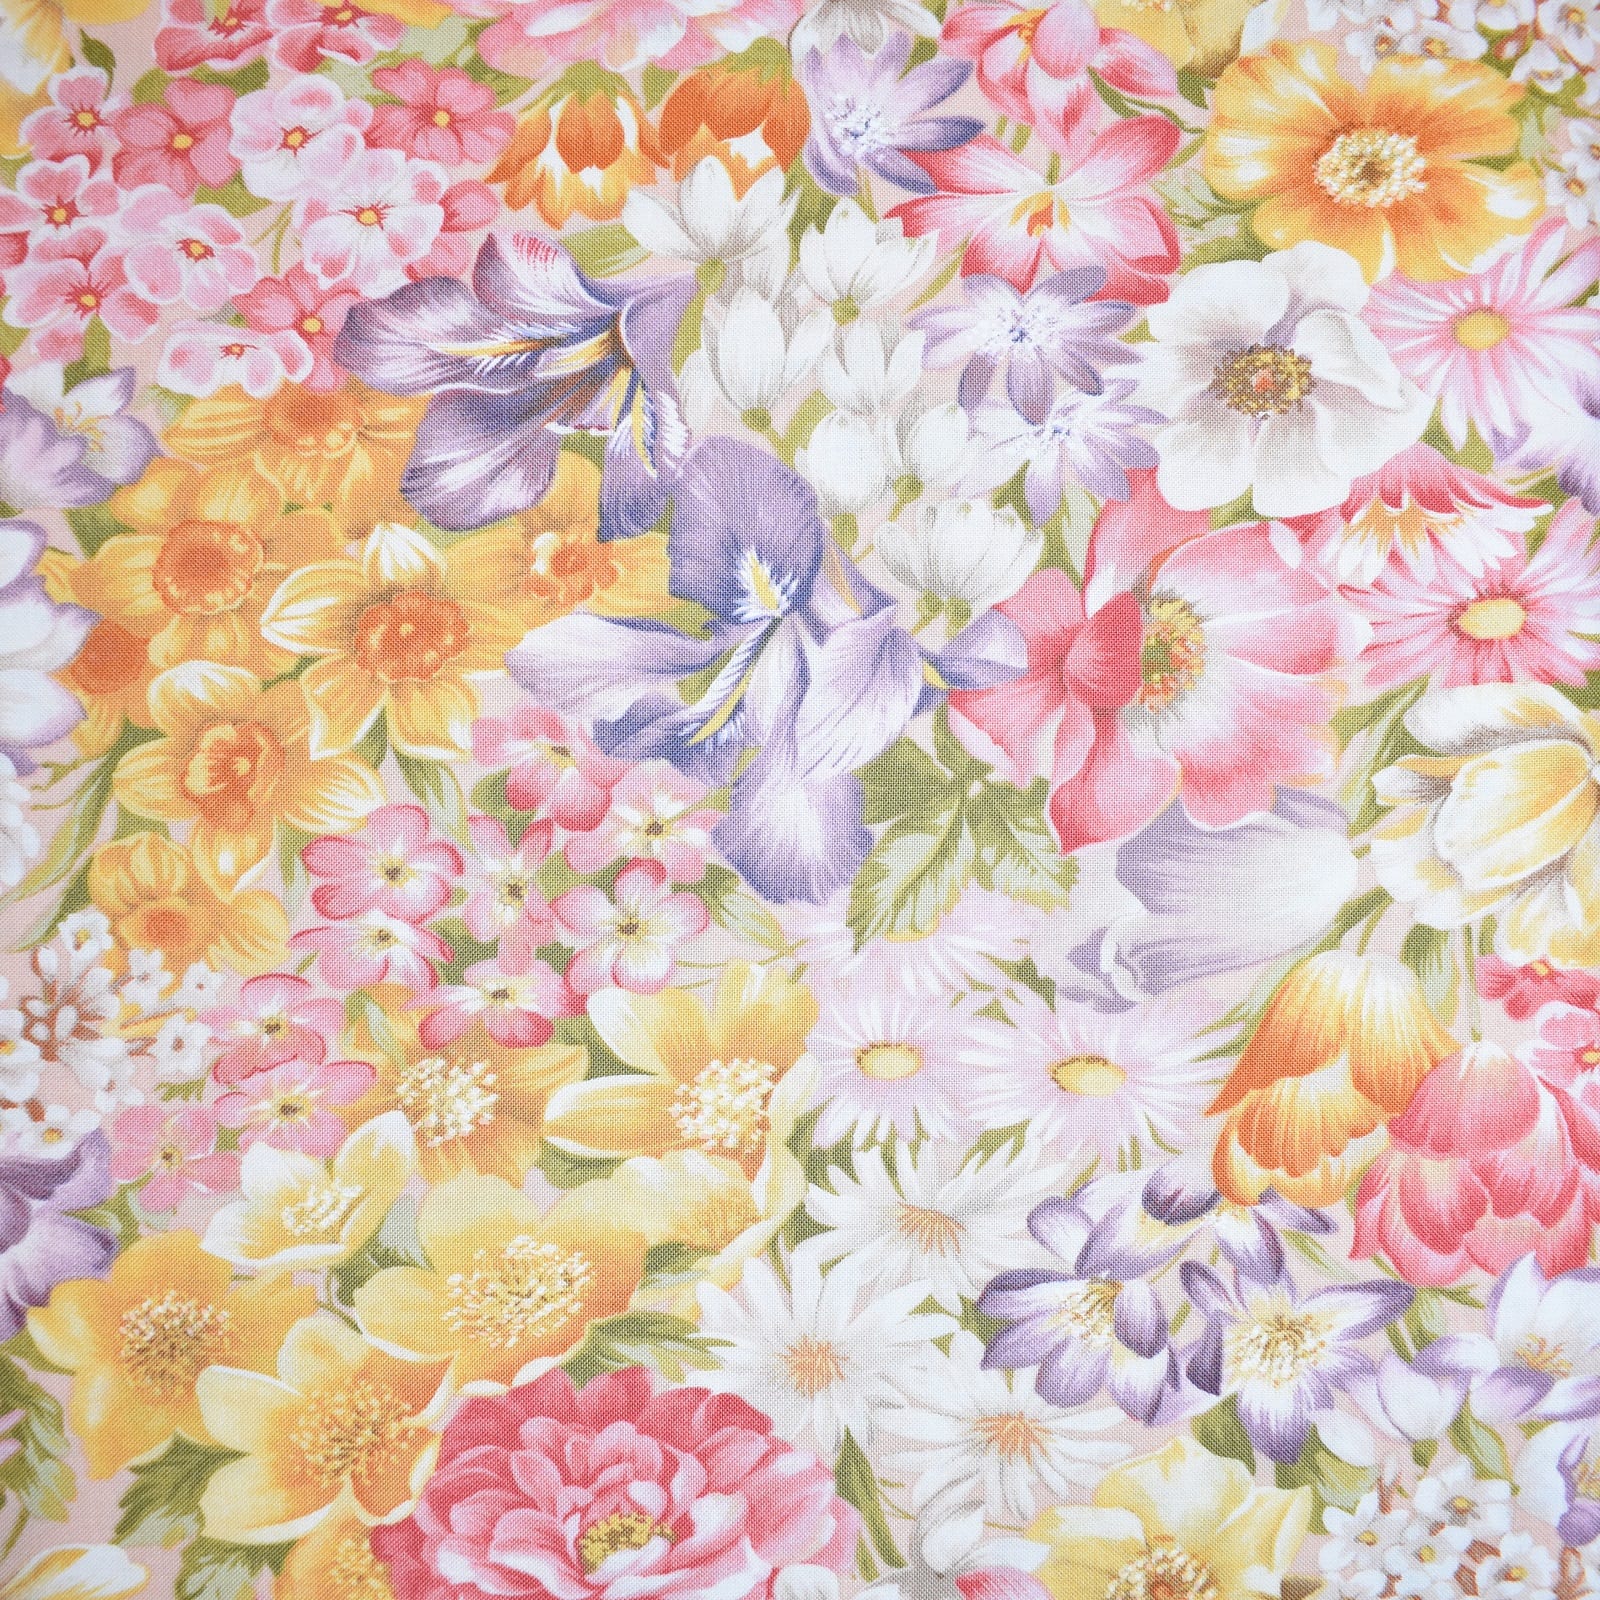 Pink Shabby Chic Watercolor Floral Fabric By The Yard